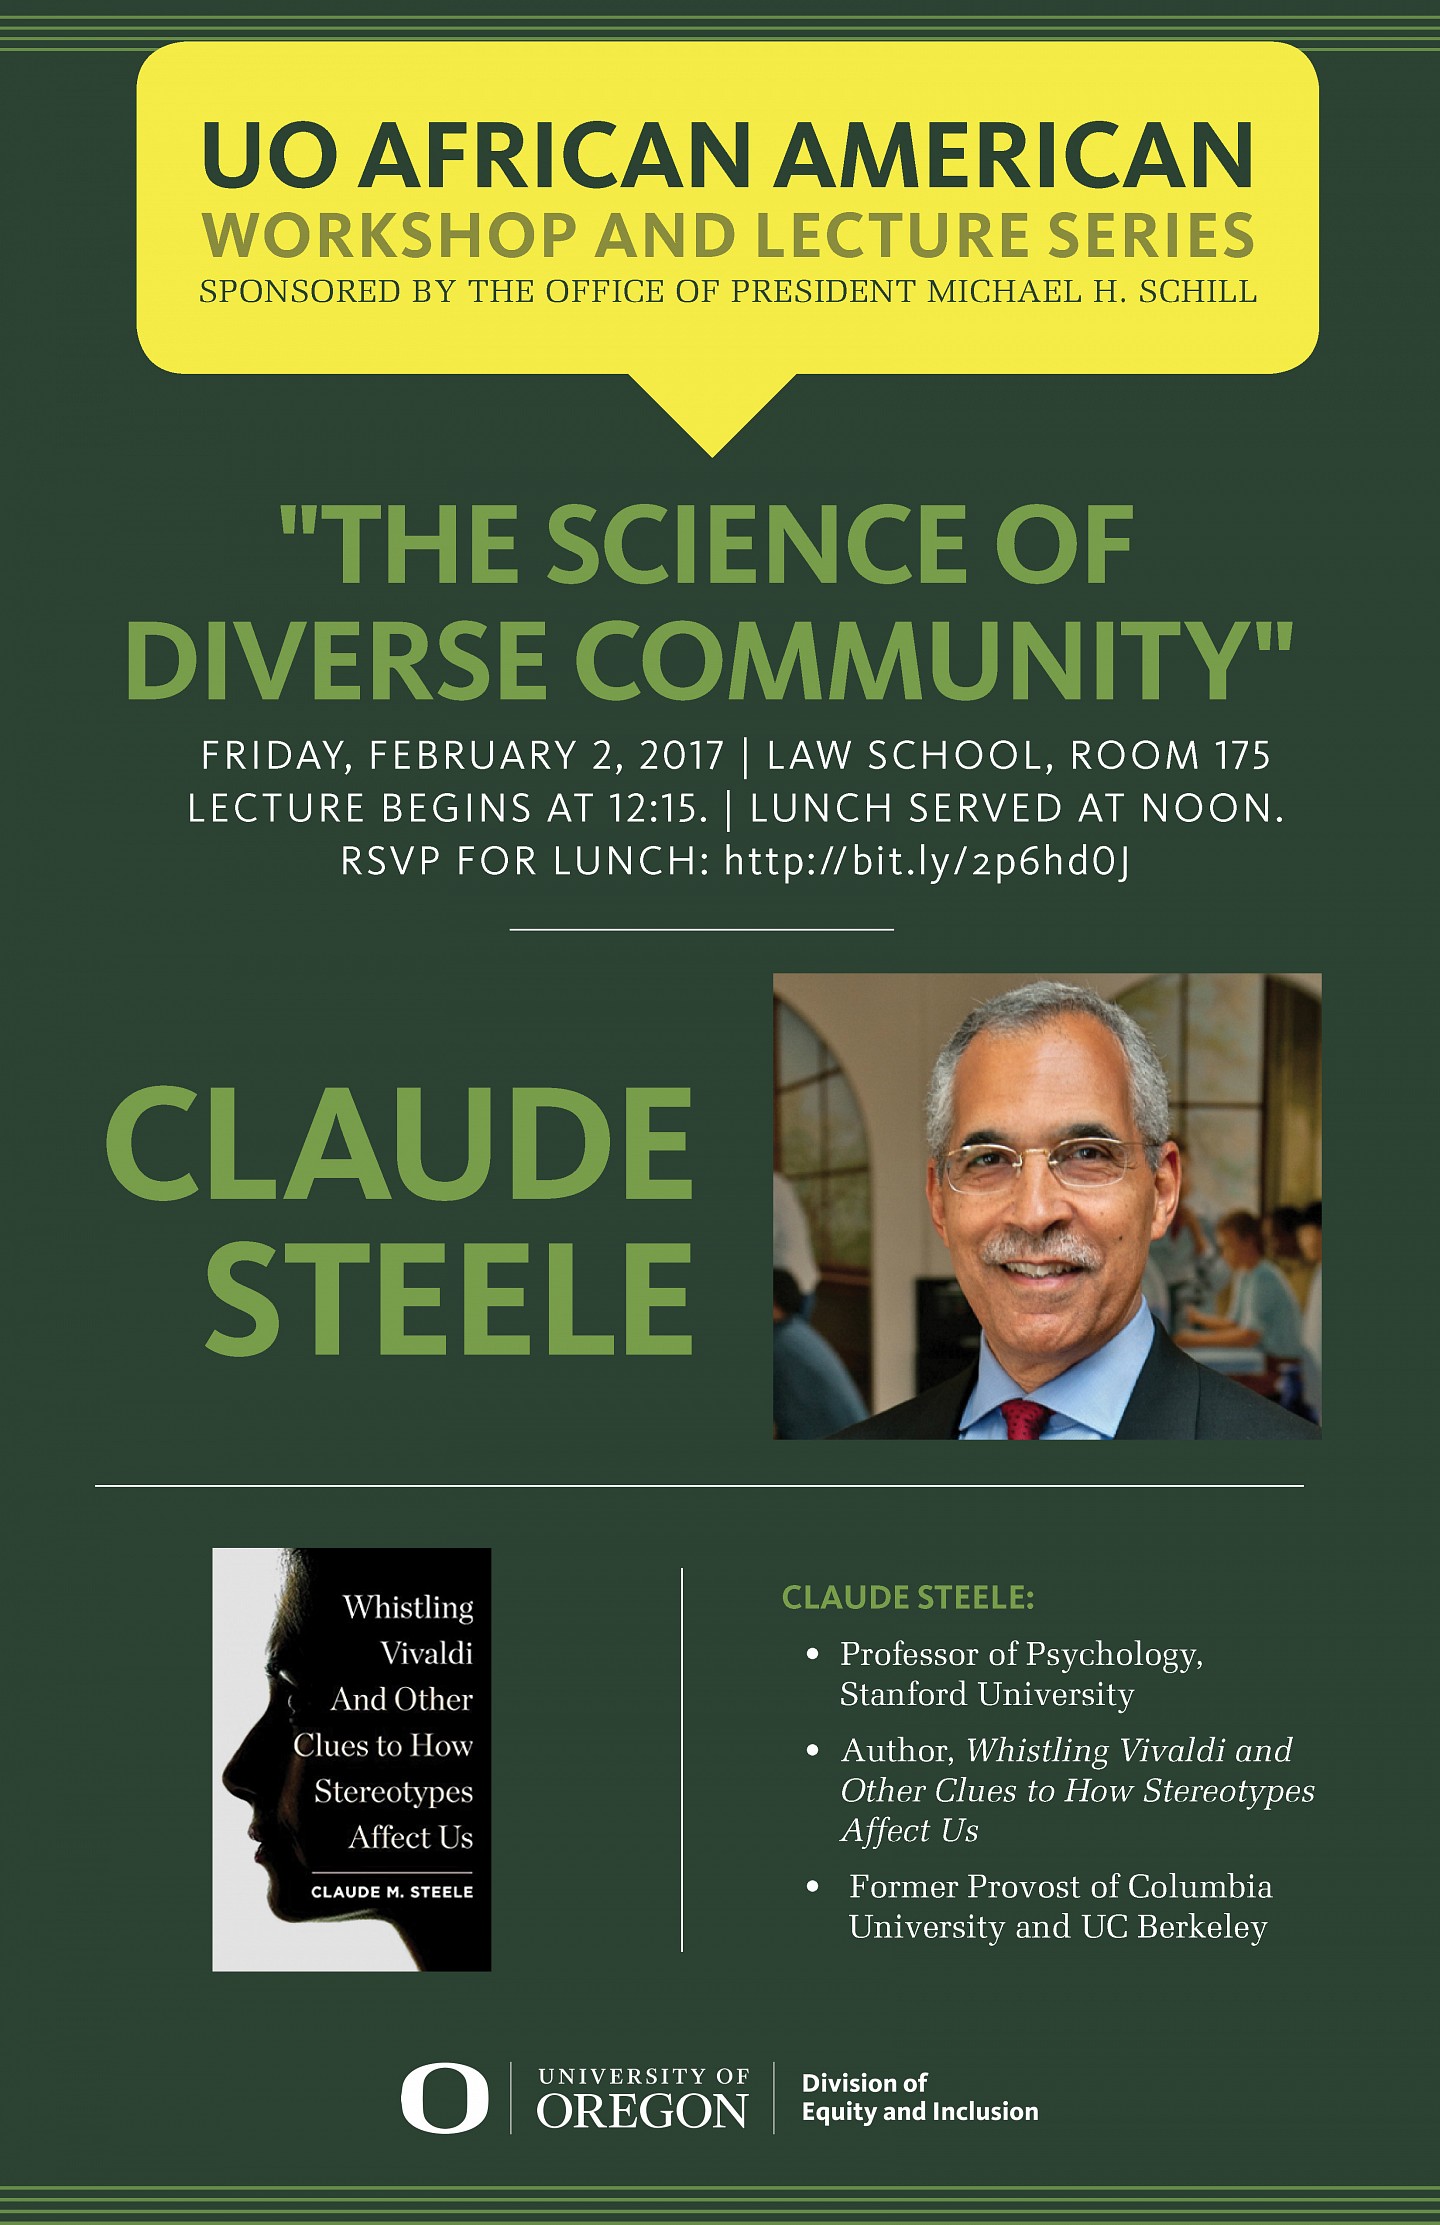 UO African American Workshop and Lecture Series "The Science of Diverse Community" Claude Steele Friday, Febuary 2, 2017 Law School, Room 175 Lecture begins at 12:15 Lunch served at Noon RSVP - Strong Recommendation